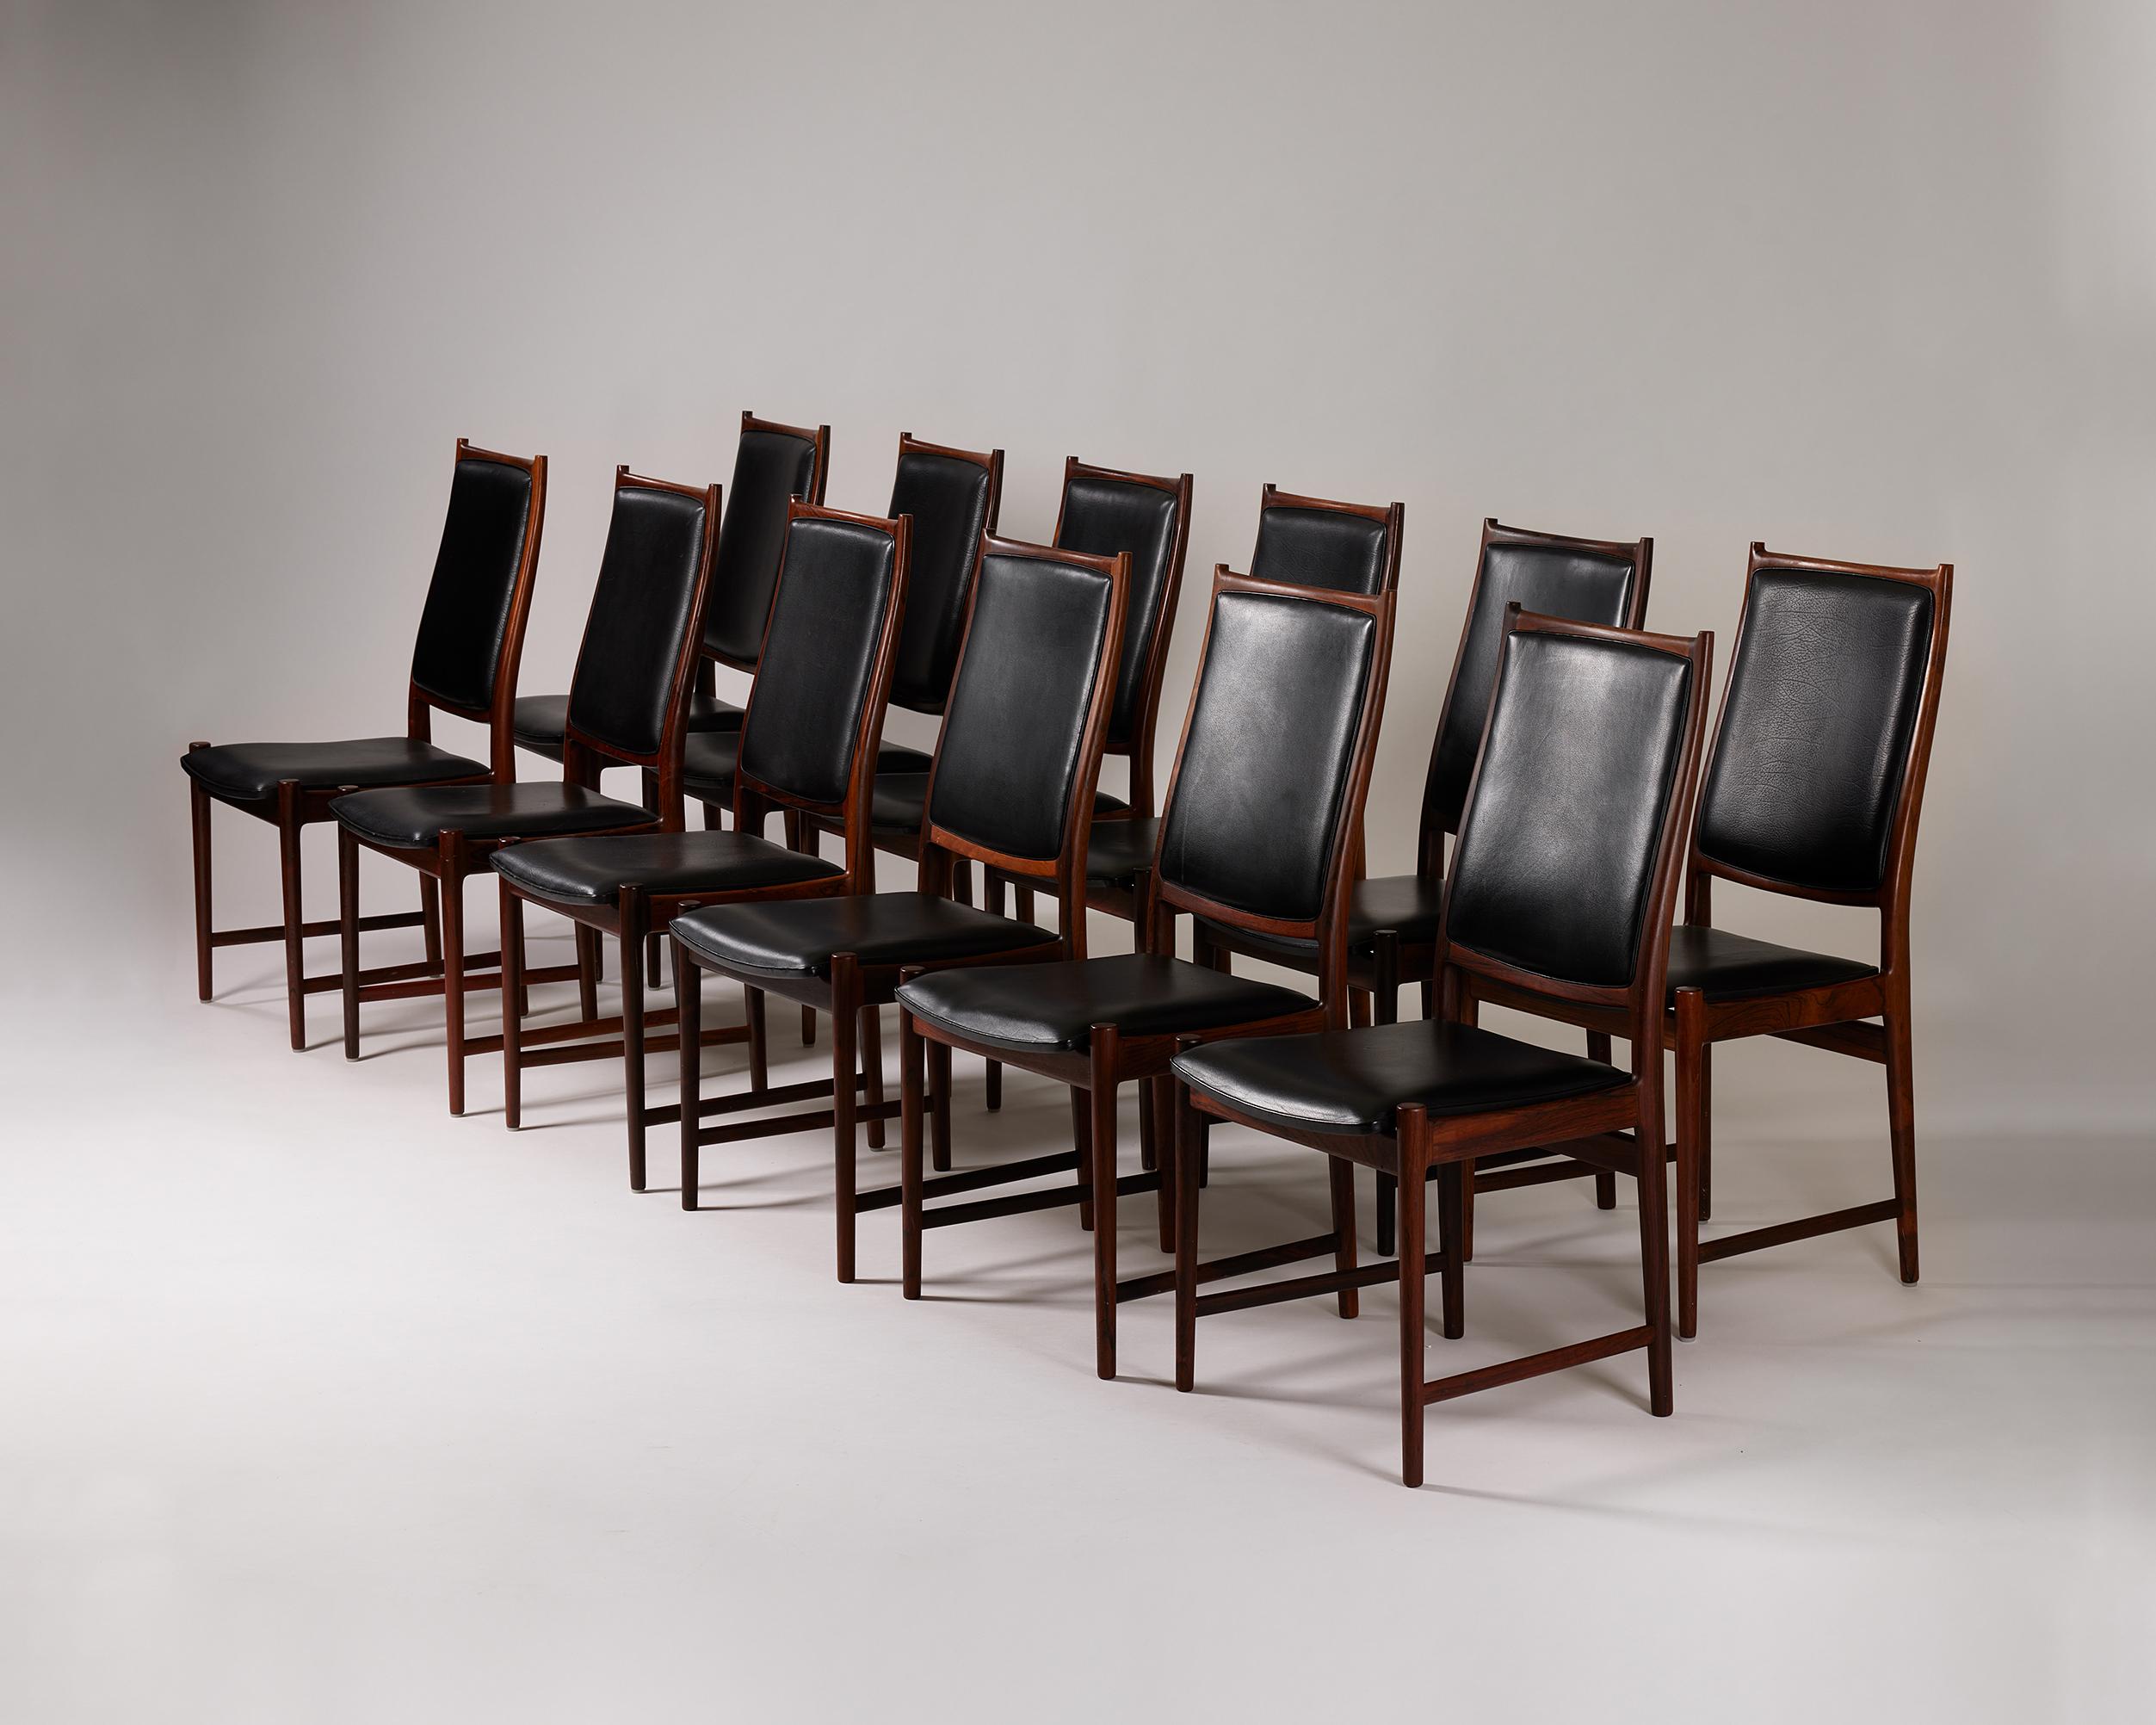 Set of twelve dining chairs ‘Darby’ designed by Torbjörn Afdal for Bruksbo.
Norway, 1960s.

Rosewood and leather.

This dining chair model 'Darby' is simple yet elegant with a sophisticated high backrest and small carved details at the top of